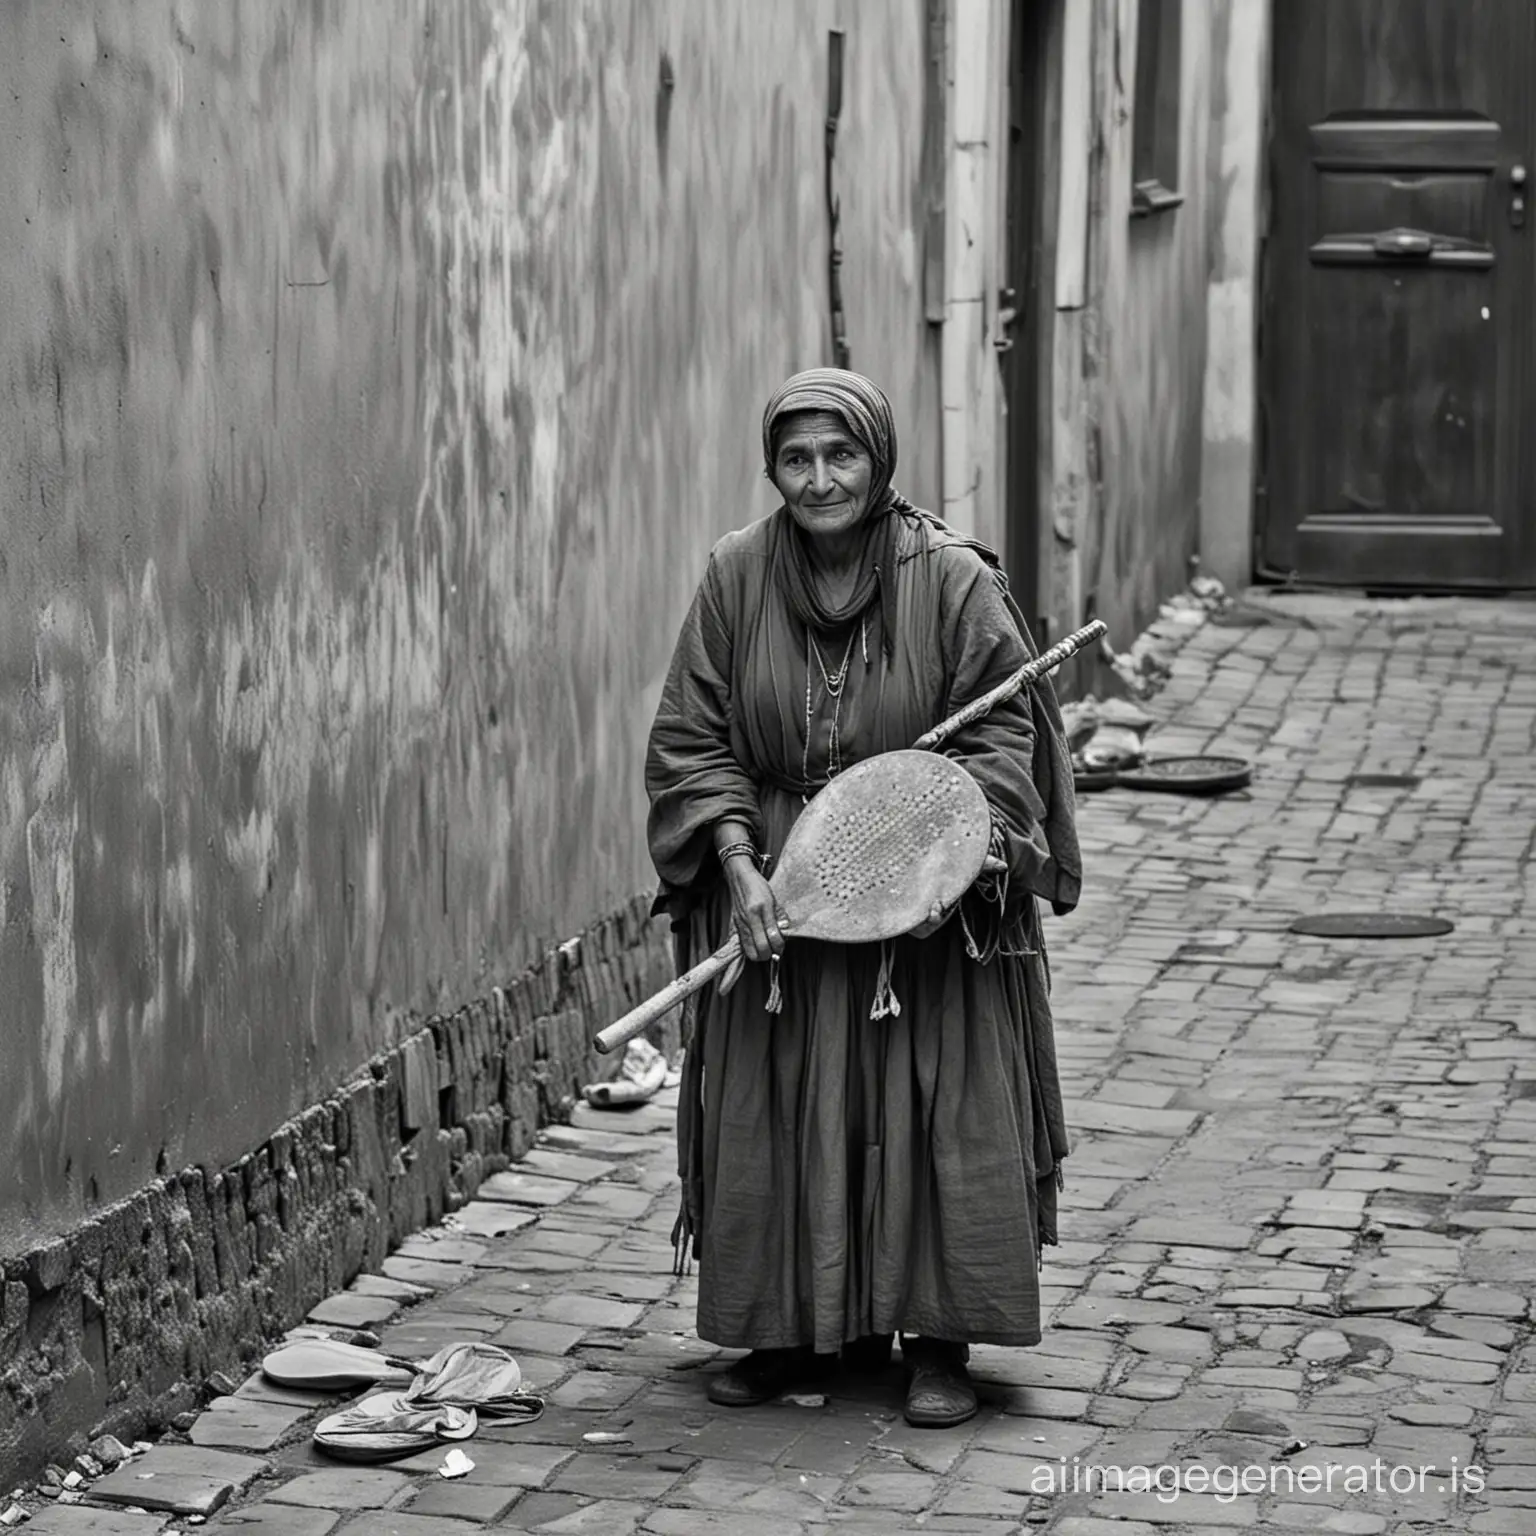 Timisoara-Beggar-Woman-with-Real-Paddle-Racket-in-Dirty-Alley